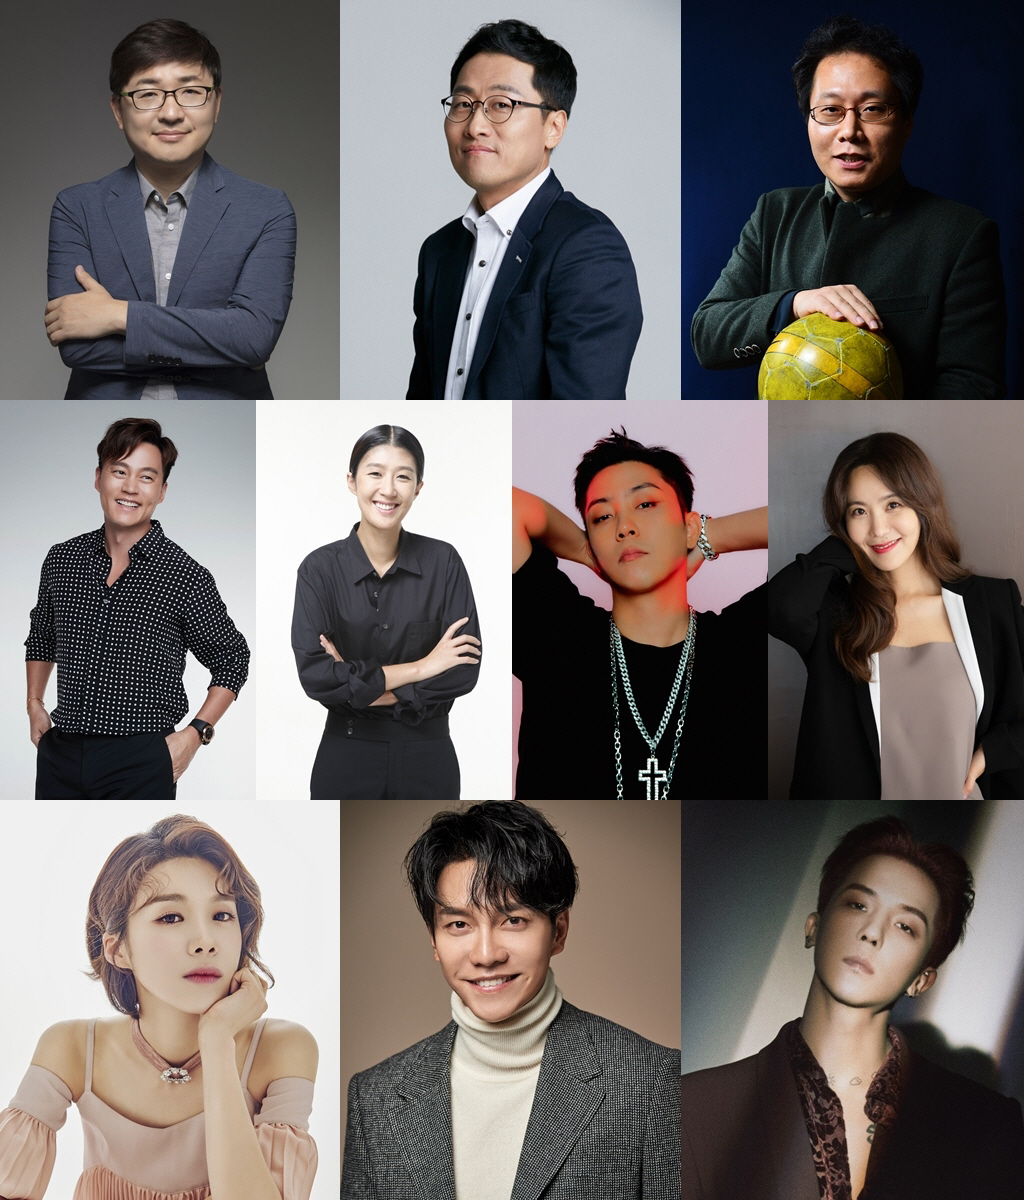 TVNs new entertainment Friday Friday Night directed by star PD Na Young-Seok is scheduled to be broadcasted on January 10th.TVN Friday Friday Night is a program consisting of six short-form corners of different materials such as sports, science, art, travel, cooking, and factories in omnibus format.10 Minutes Short, different themes of corners will give viewers a boring fun.Na Young-Seok PD, Shishi Sekisui Sea Ranch and Spanish boarding Jang Eun-jung PD will co-direct.The appearance of different cast members in each corner is also a feature of Friday Friday Night, so the lineup of as many performers as the corner catches the eye.Professor Yang Jung-moo of How to Adult, Professor Kim Sang-wook of Alsul Shin-Job 3, soccer commentator Han Jun-hee, Lee Seo-jin, Hong Jin Kyung, Eun Ji-won, Park Ji-yoon announcer, Jang Do Yeon, Lee Seung-gi and Song Min Ho are expected to have various fun.Jang Eun-jung PD, who co-directs Friday Friday Night, said, Short content, so-called short-form content, is emerging as a popular mobile content.In line with these trends, Friday Friday Night will show a short corner of about 10 minutes different from each other. I have invited talented cast members in various fields such as sports, science, art, travel, and cooking. I would like to ask for your expectation because their activities will be exciting.Meanwhile, Friday Friday Night will be broadcast on January 10th (Friday) at 9:10 pm Minutes.